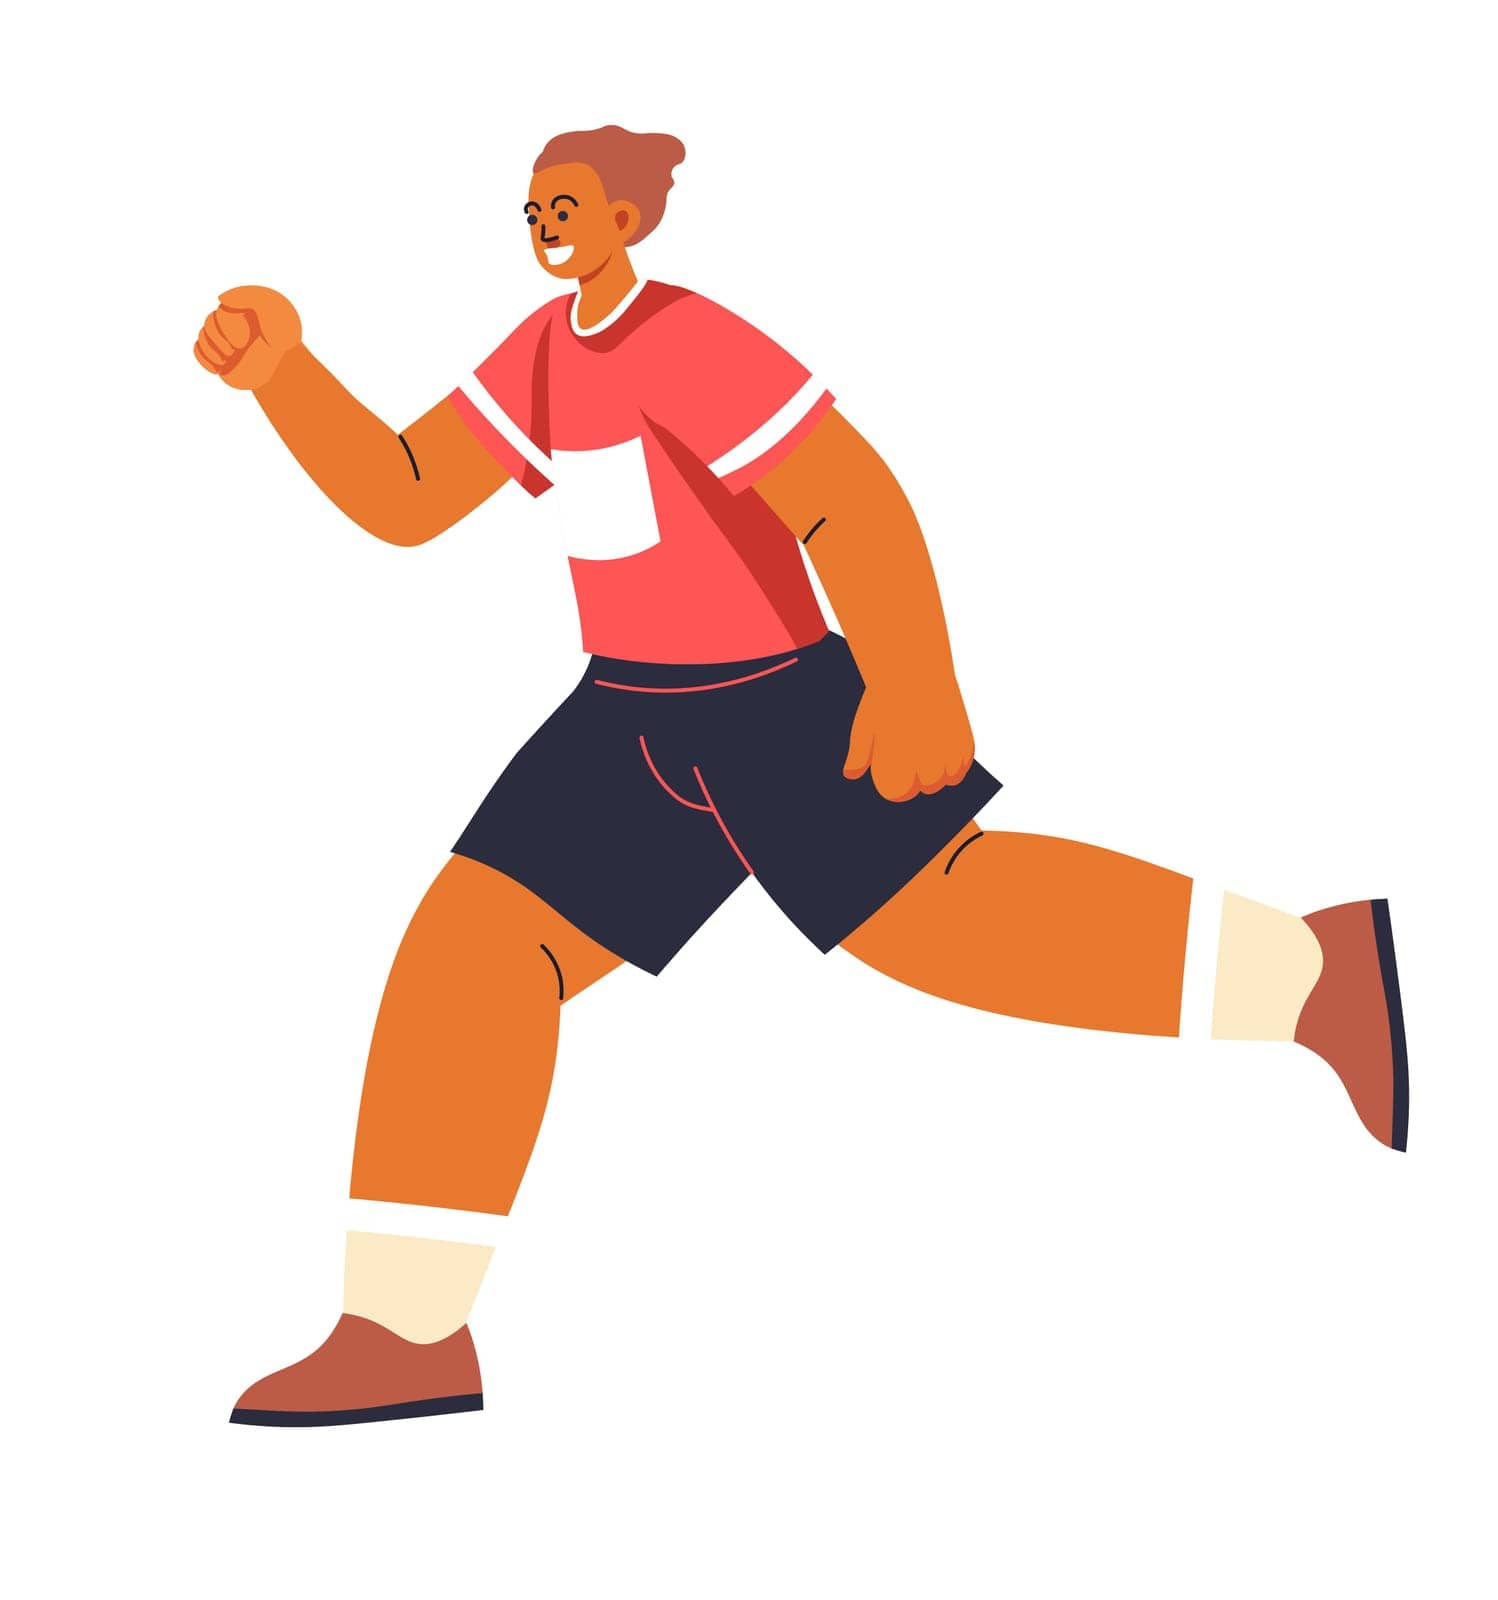 Flat vector of a man running, isolated on white, depicting a fitness routine. Great for exercise and health content.